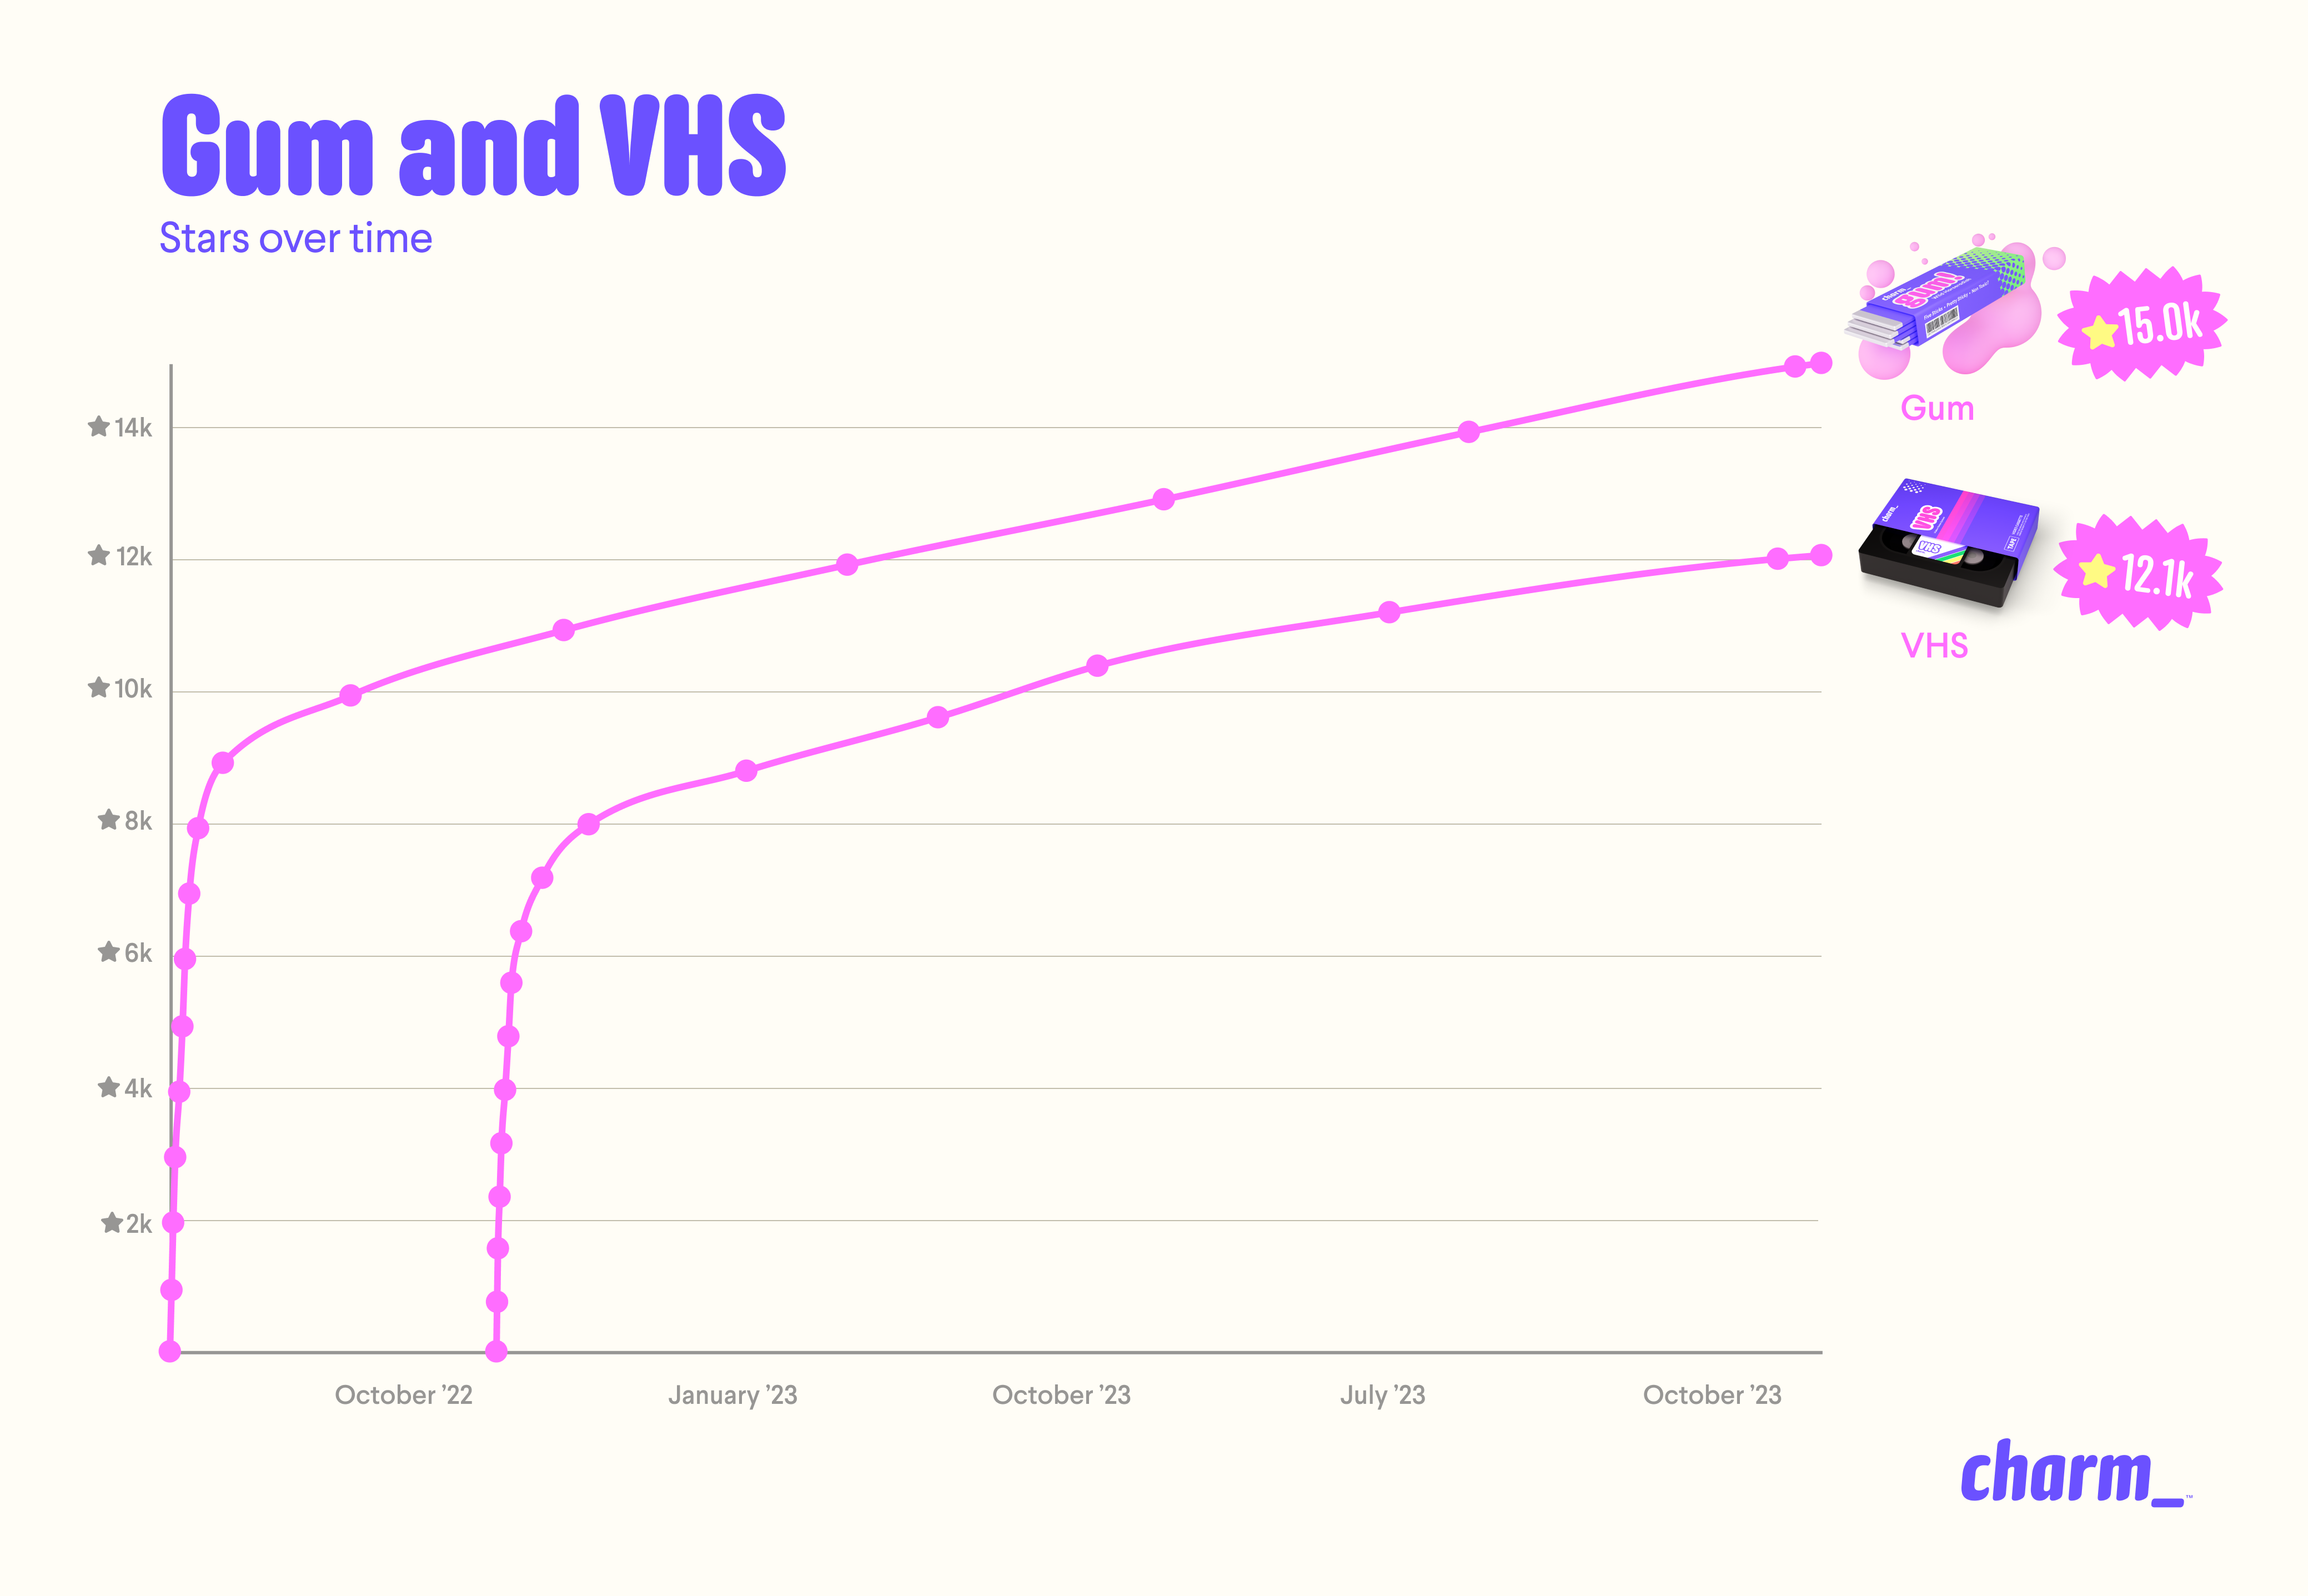 Chart showing Gum and VHS star growth over time